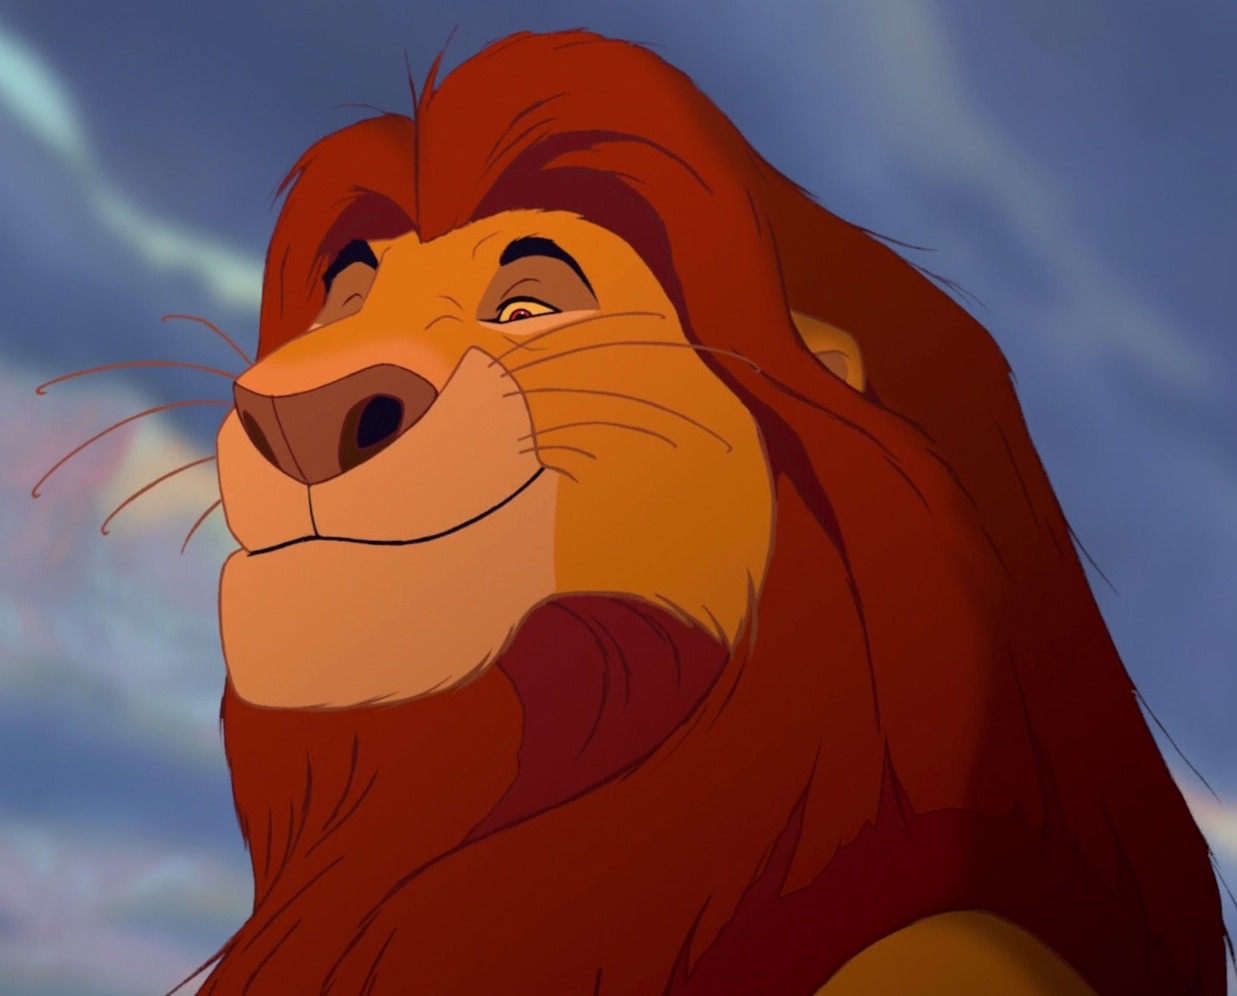 Pictures Of Mufasa From Lion King - KibrisPDR